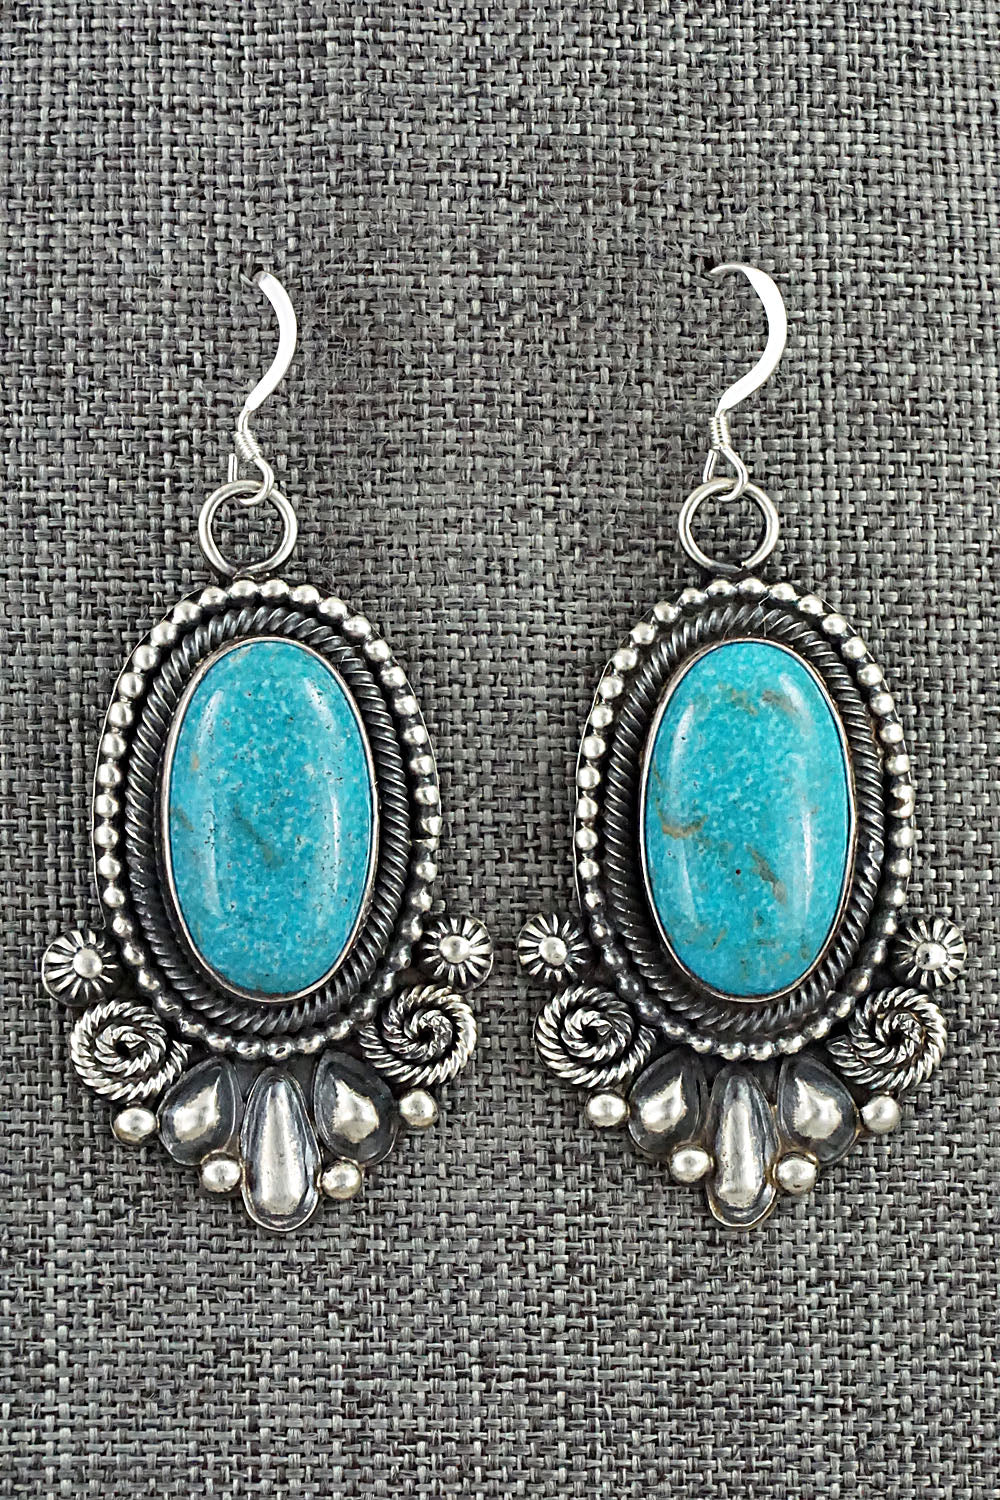 Turquoise & Sterling Silver Squash Blossom Necklace and Earrings - Hemerson Brown